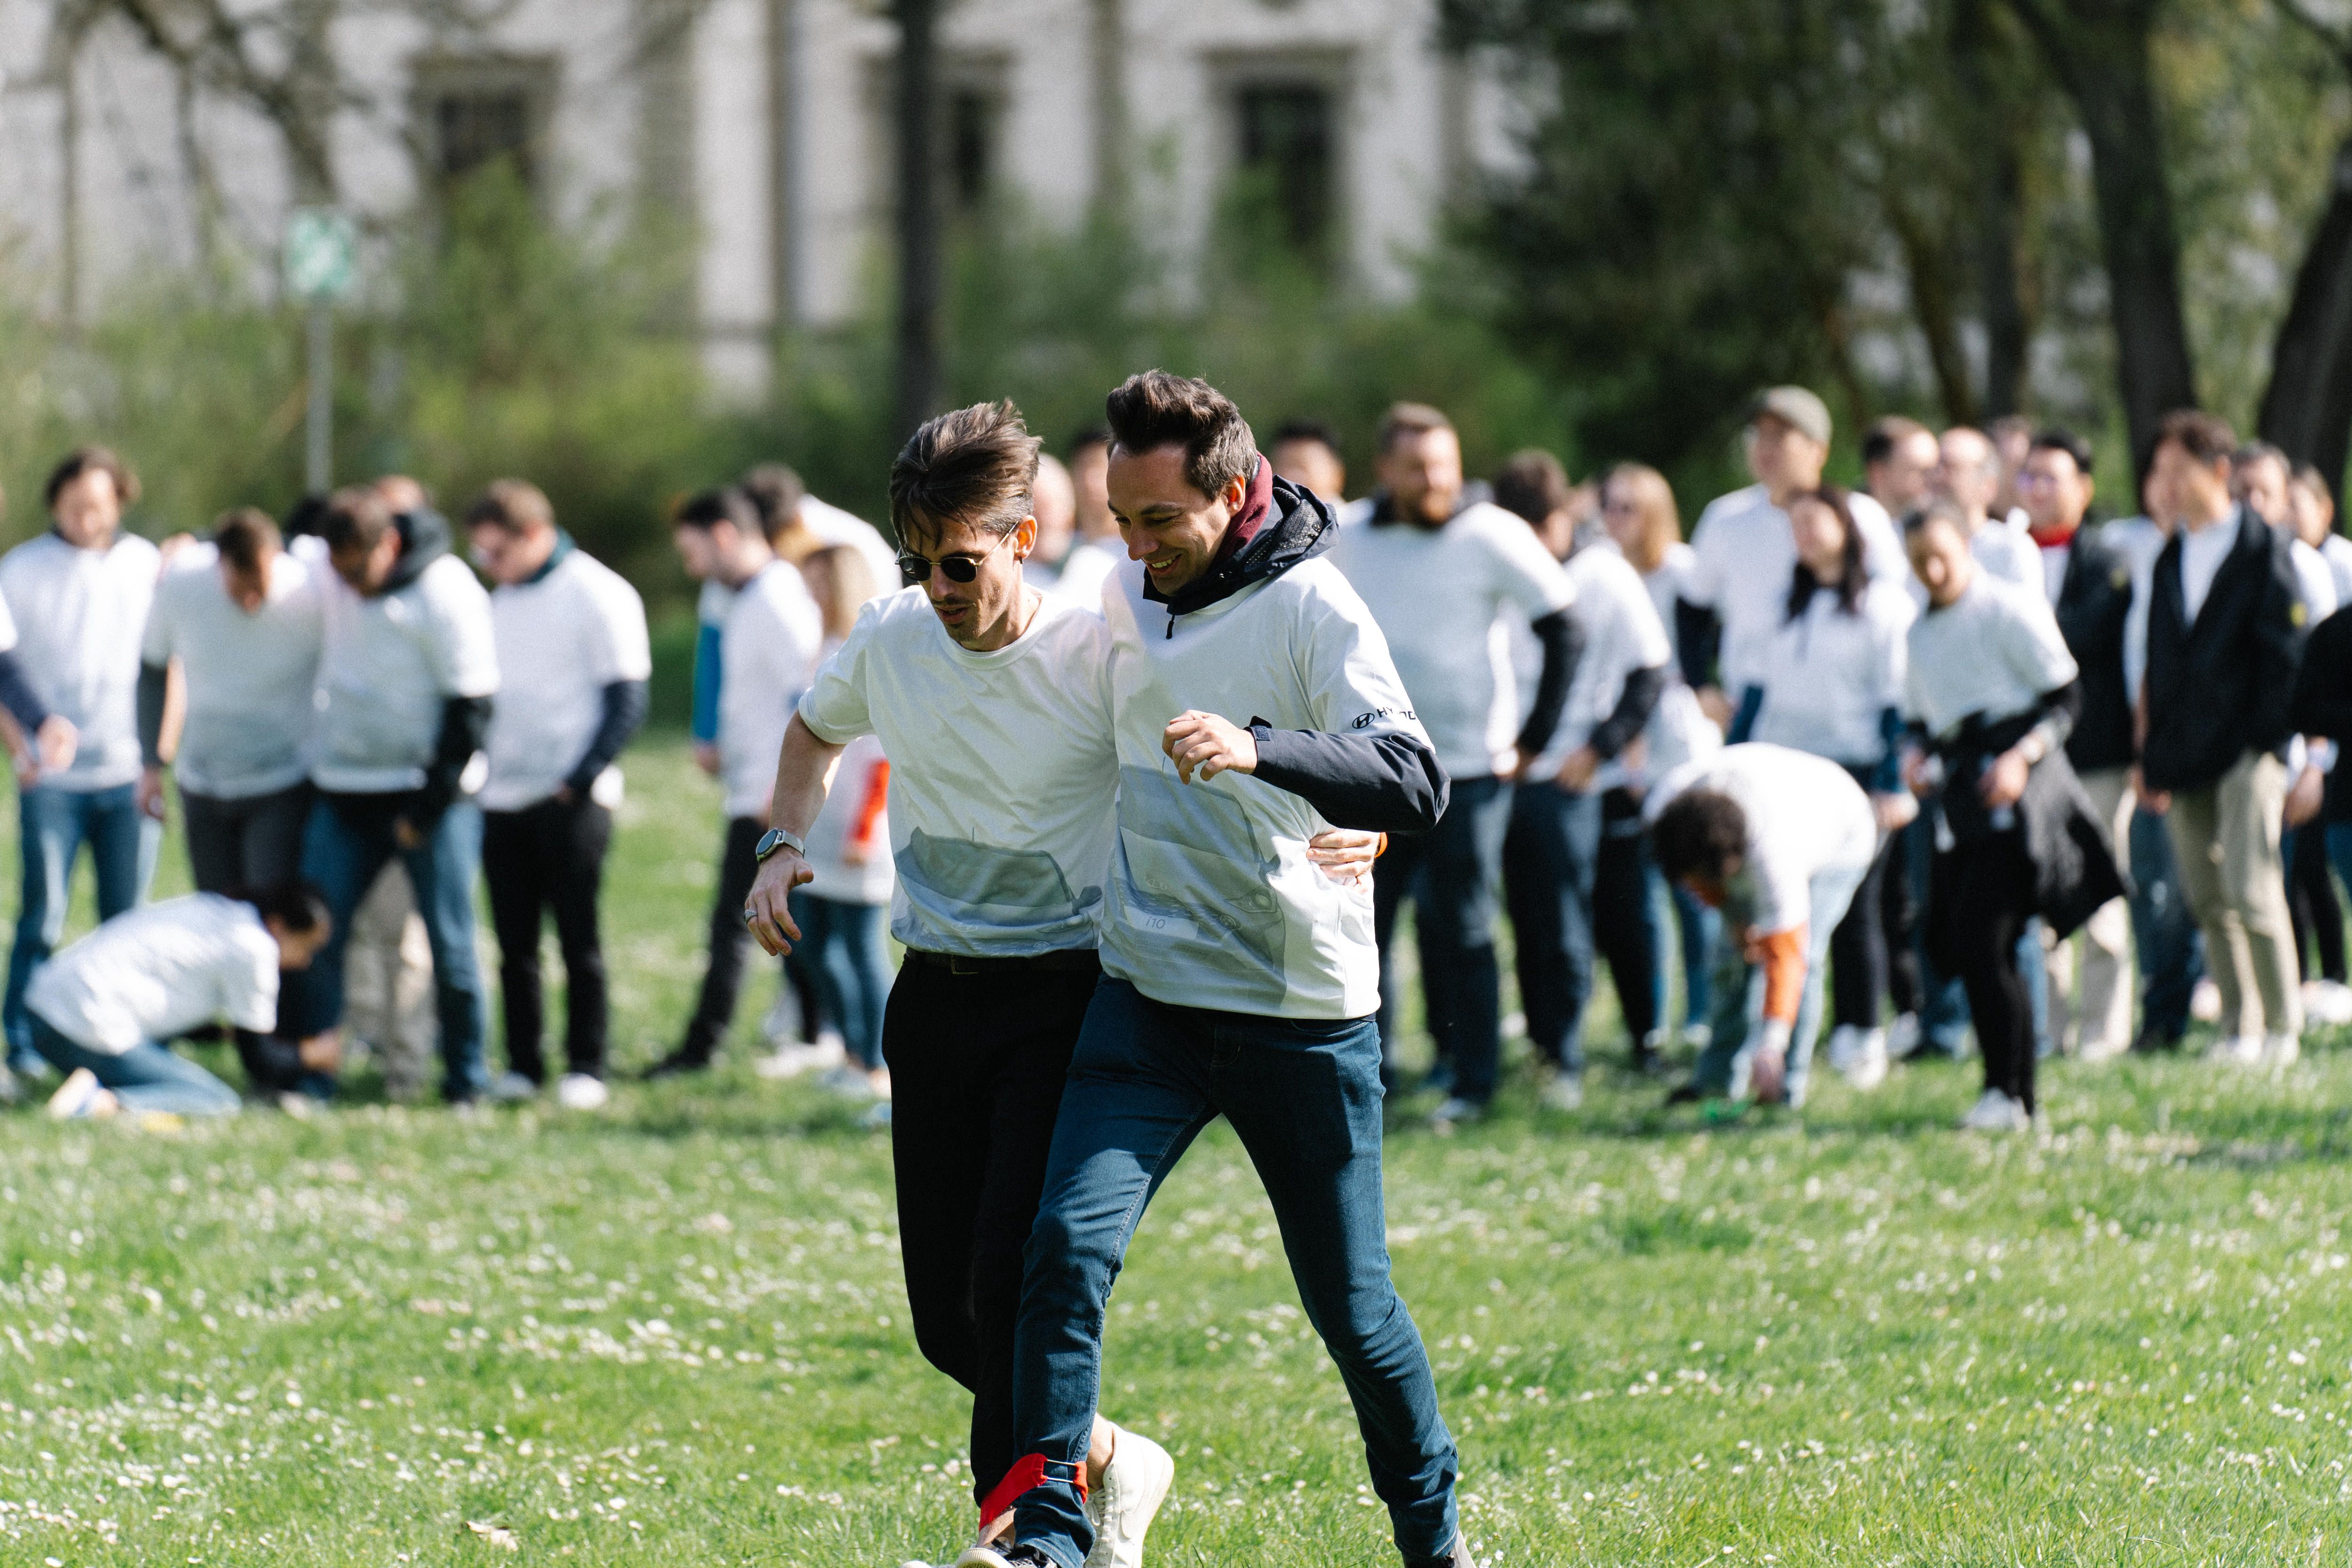 Two individuals participate in a three-legged race, tightly bound together at the leg, striving for coordination and balance, as spectators in the background watch their effortful sync. 